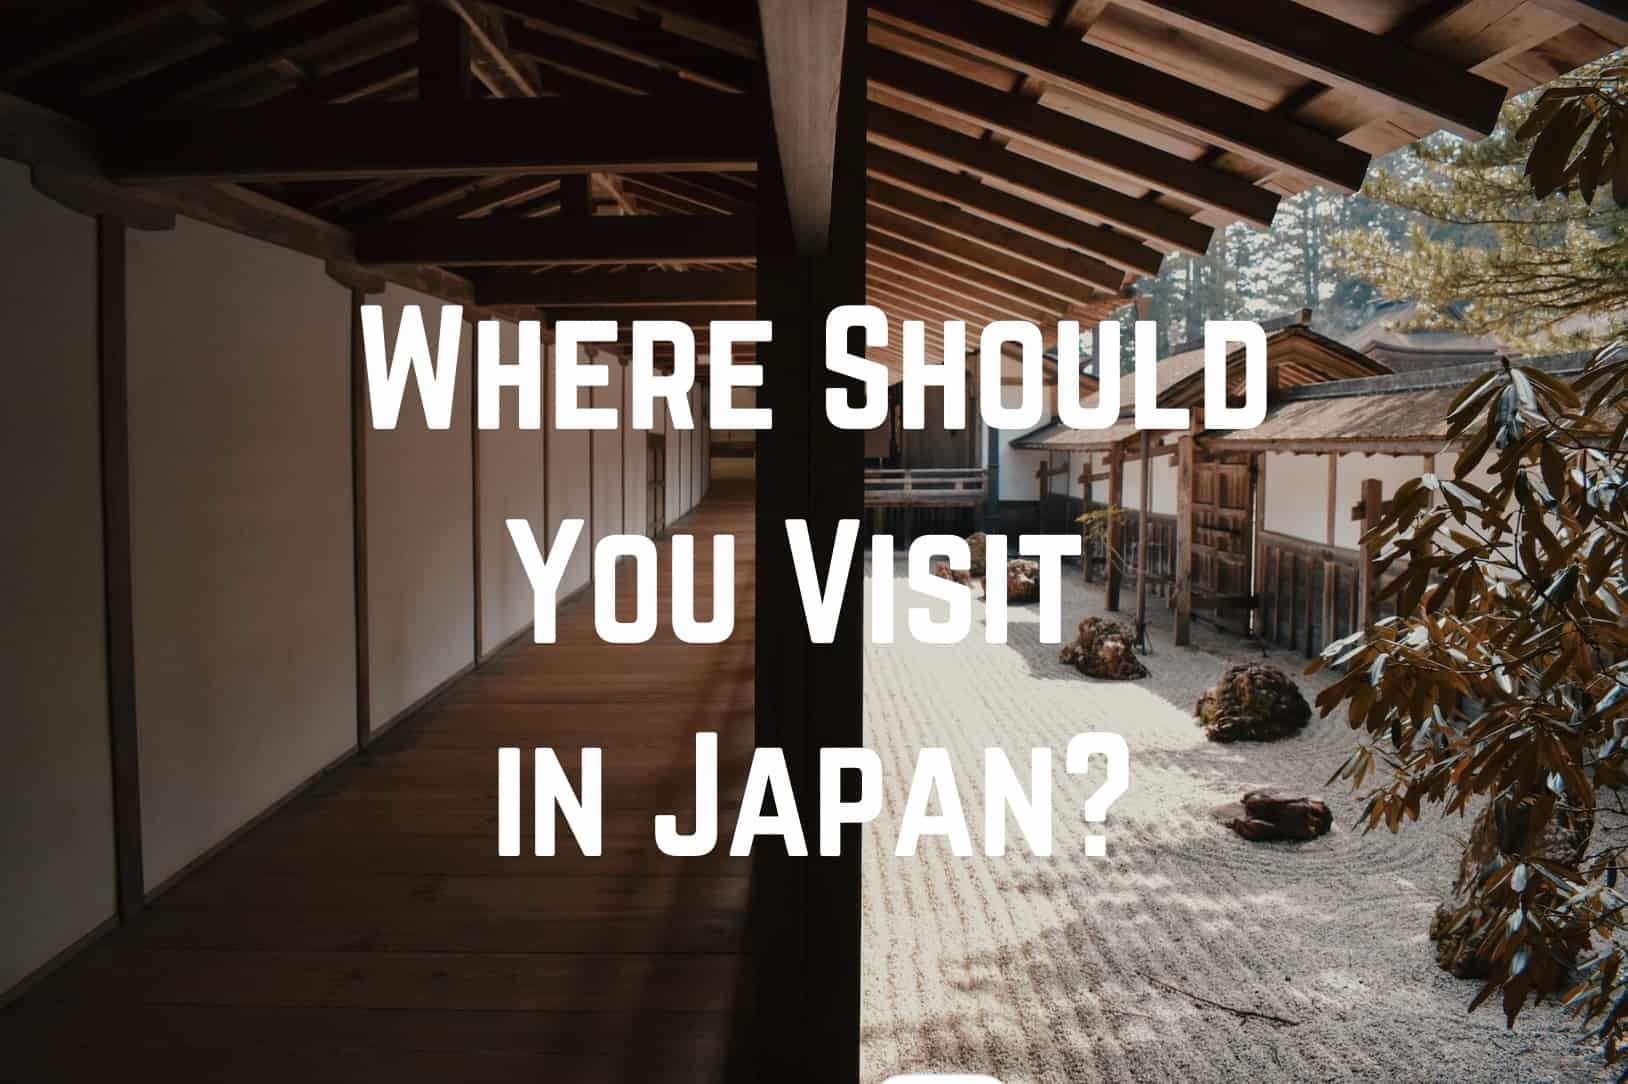 Where should you visit in Japan quiz